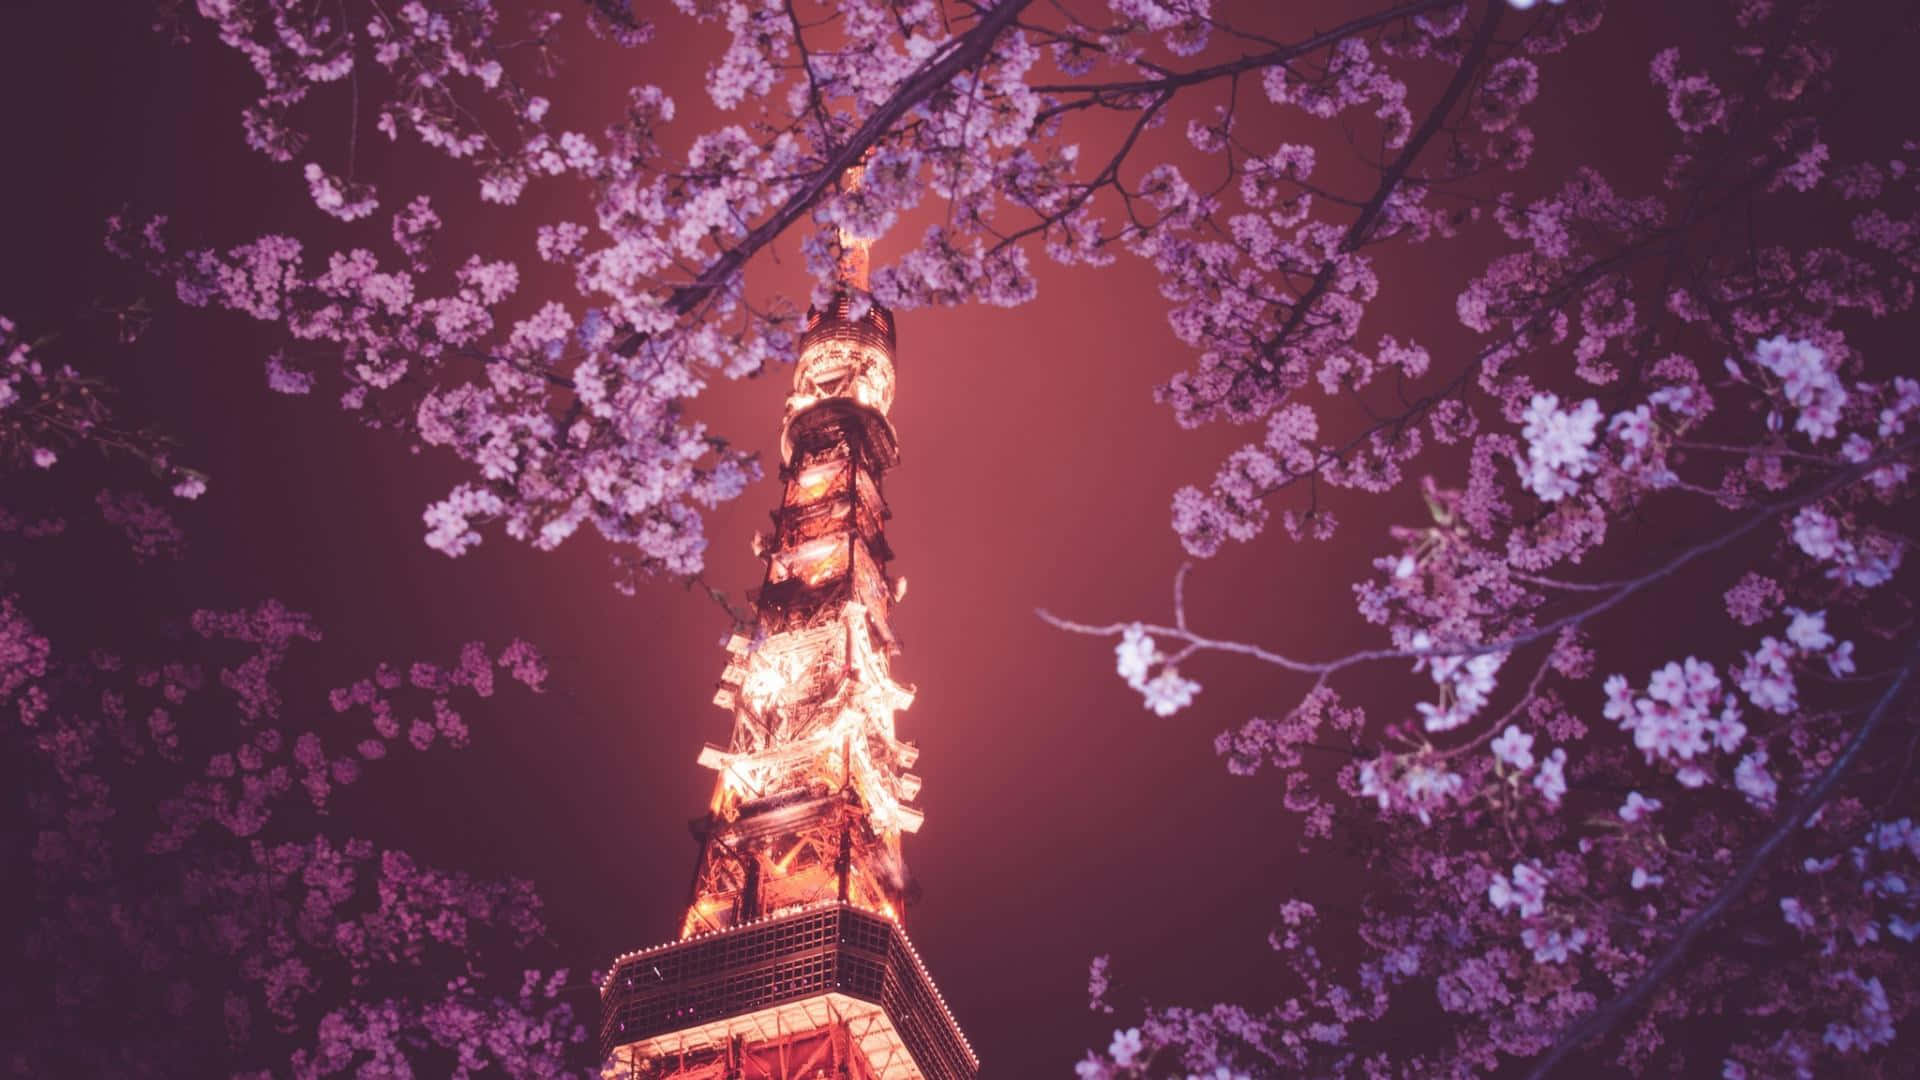 The Tower And Aesthetic Cherry Blossom Wallpaper